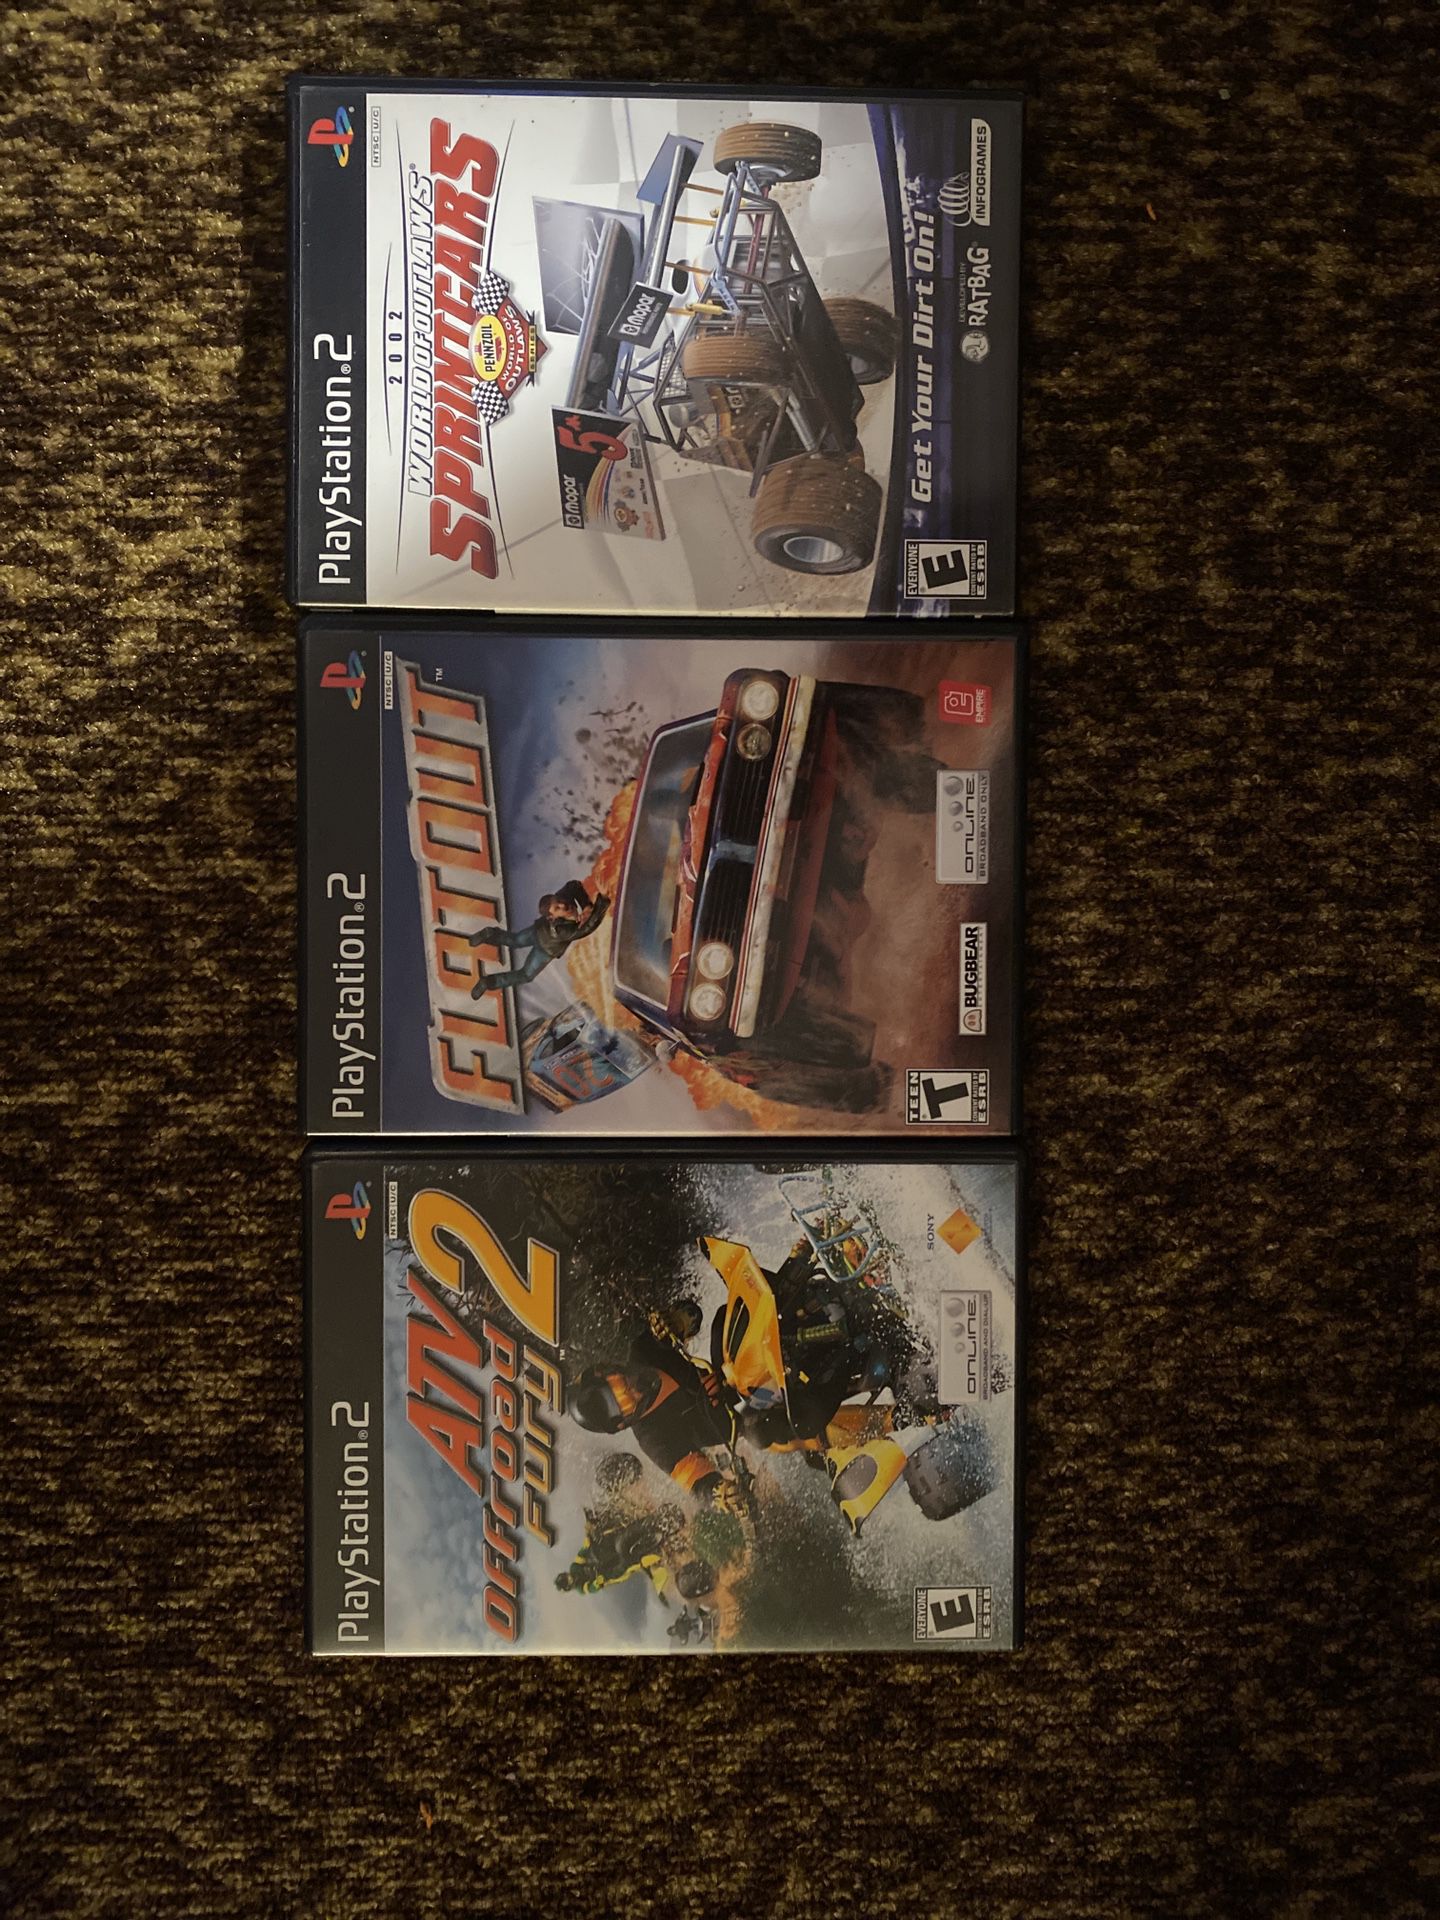 PS2 Game Lot Complete. Some light scratches